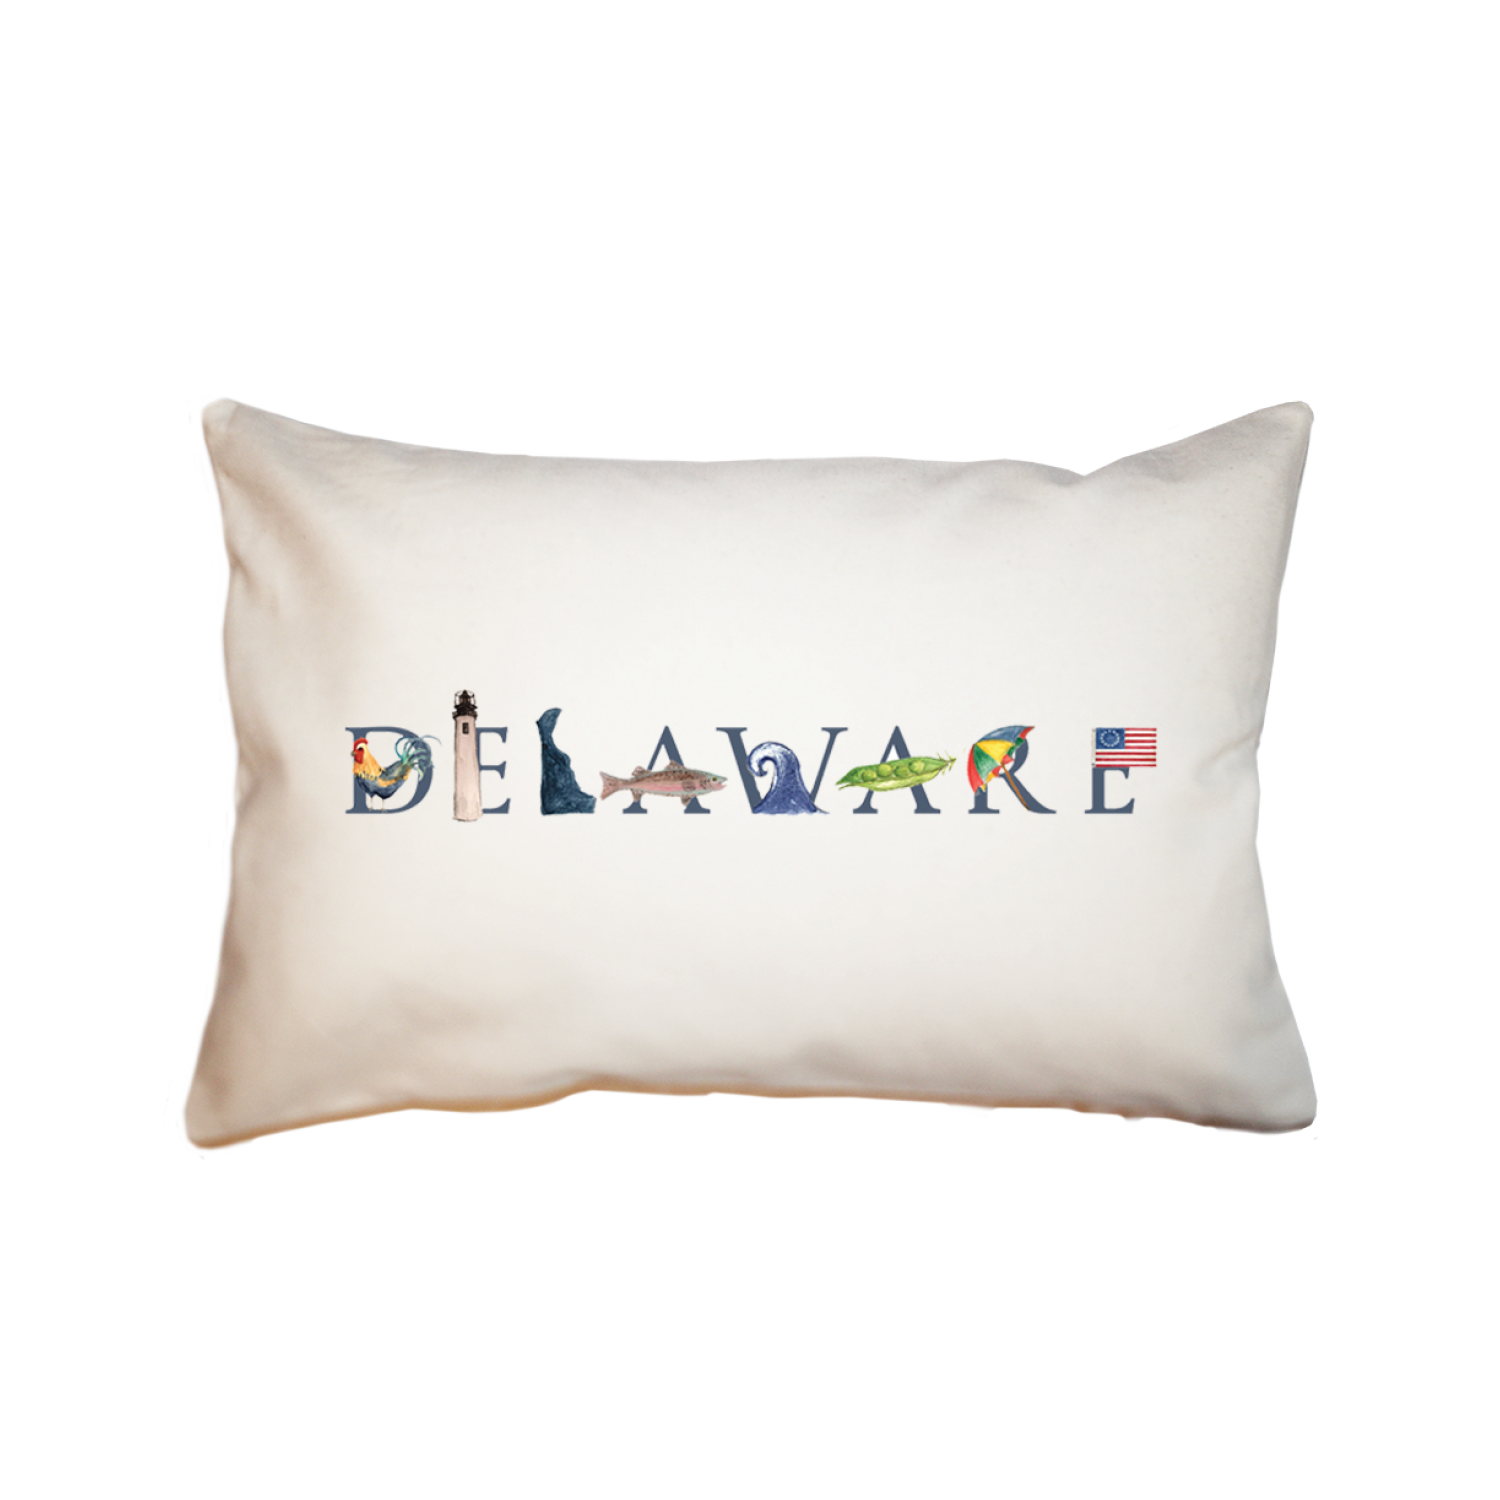 Delaware large rectangle pillow